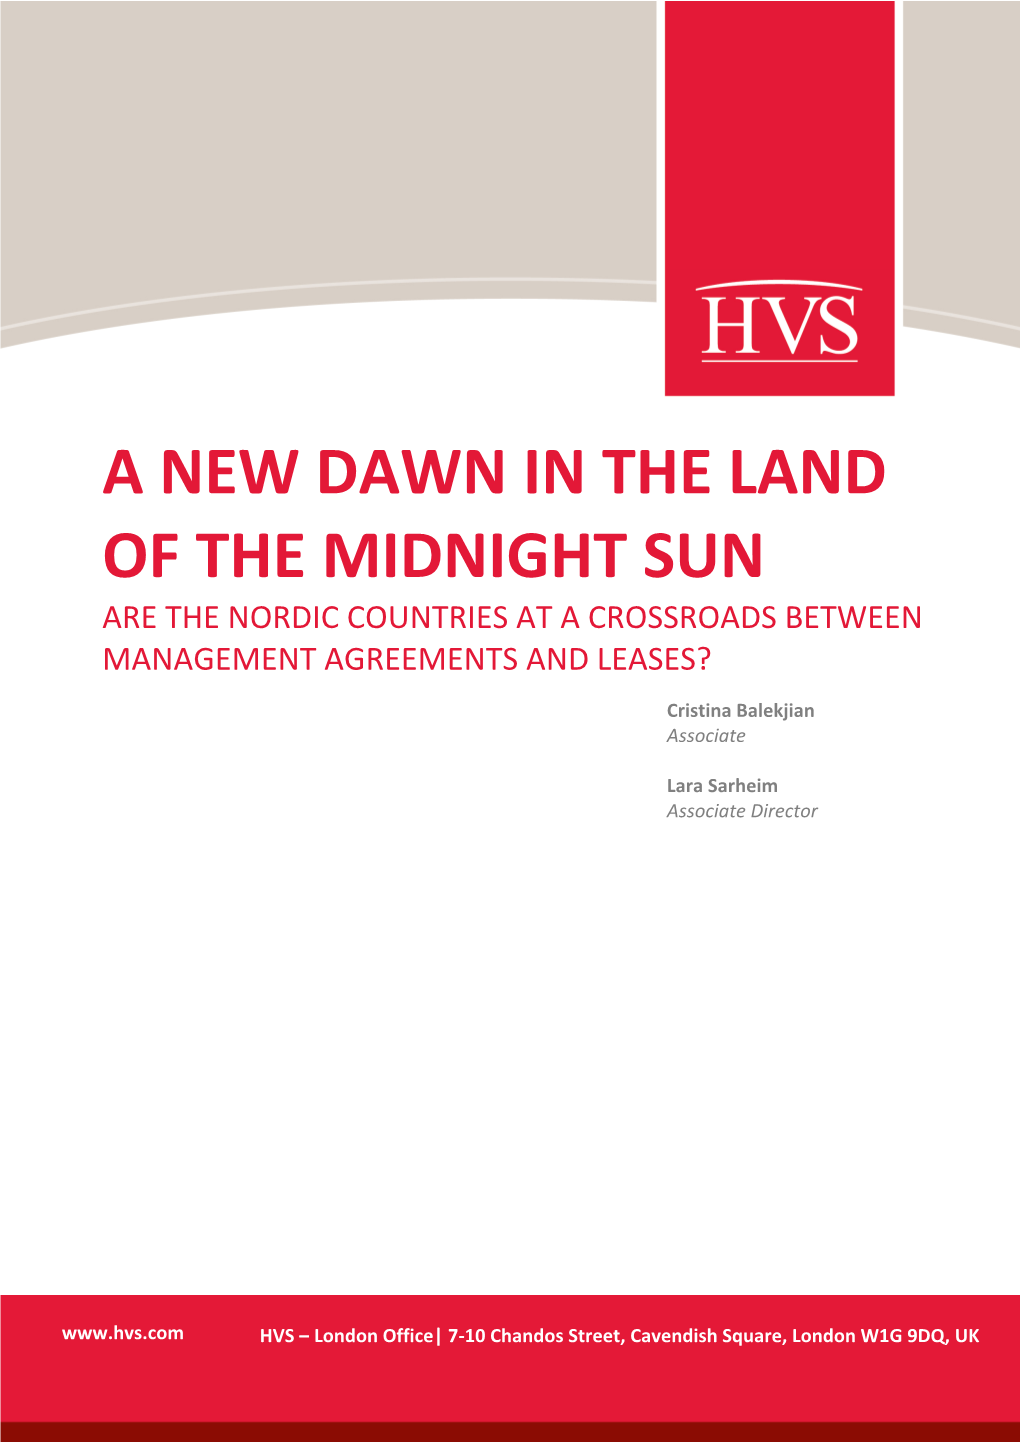 A New Dawn in the Land of the Midnight Sun Are the Nordic Countries at a Crossroads Between Management Agreements and Leases?